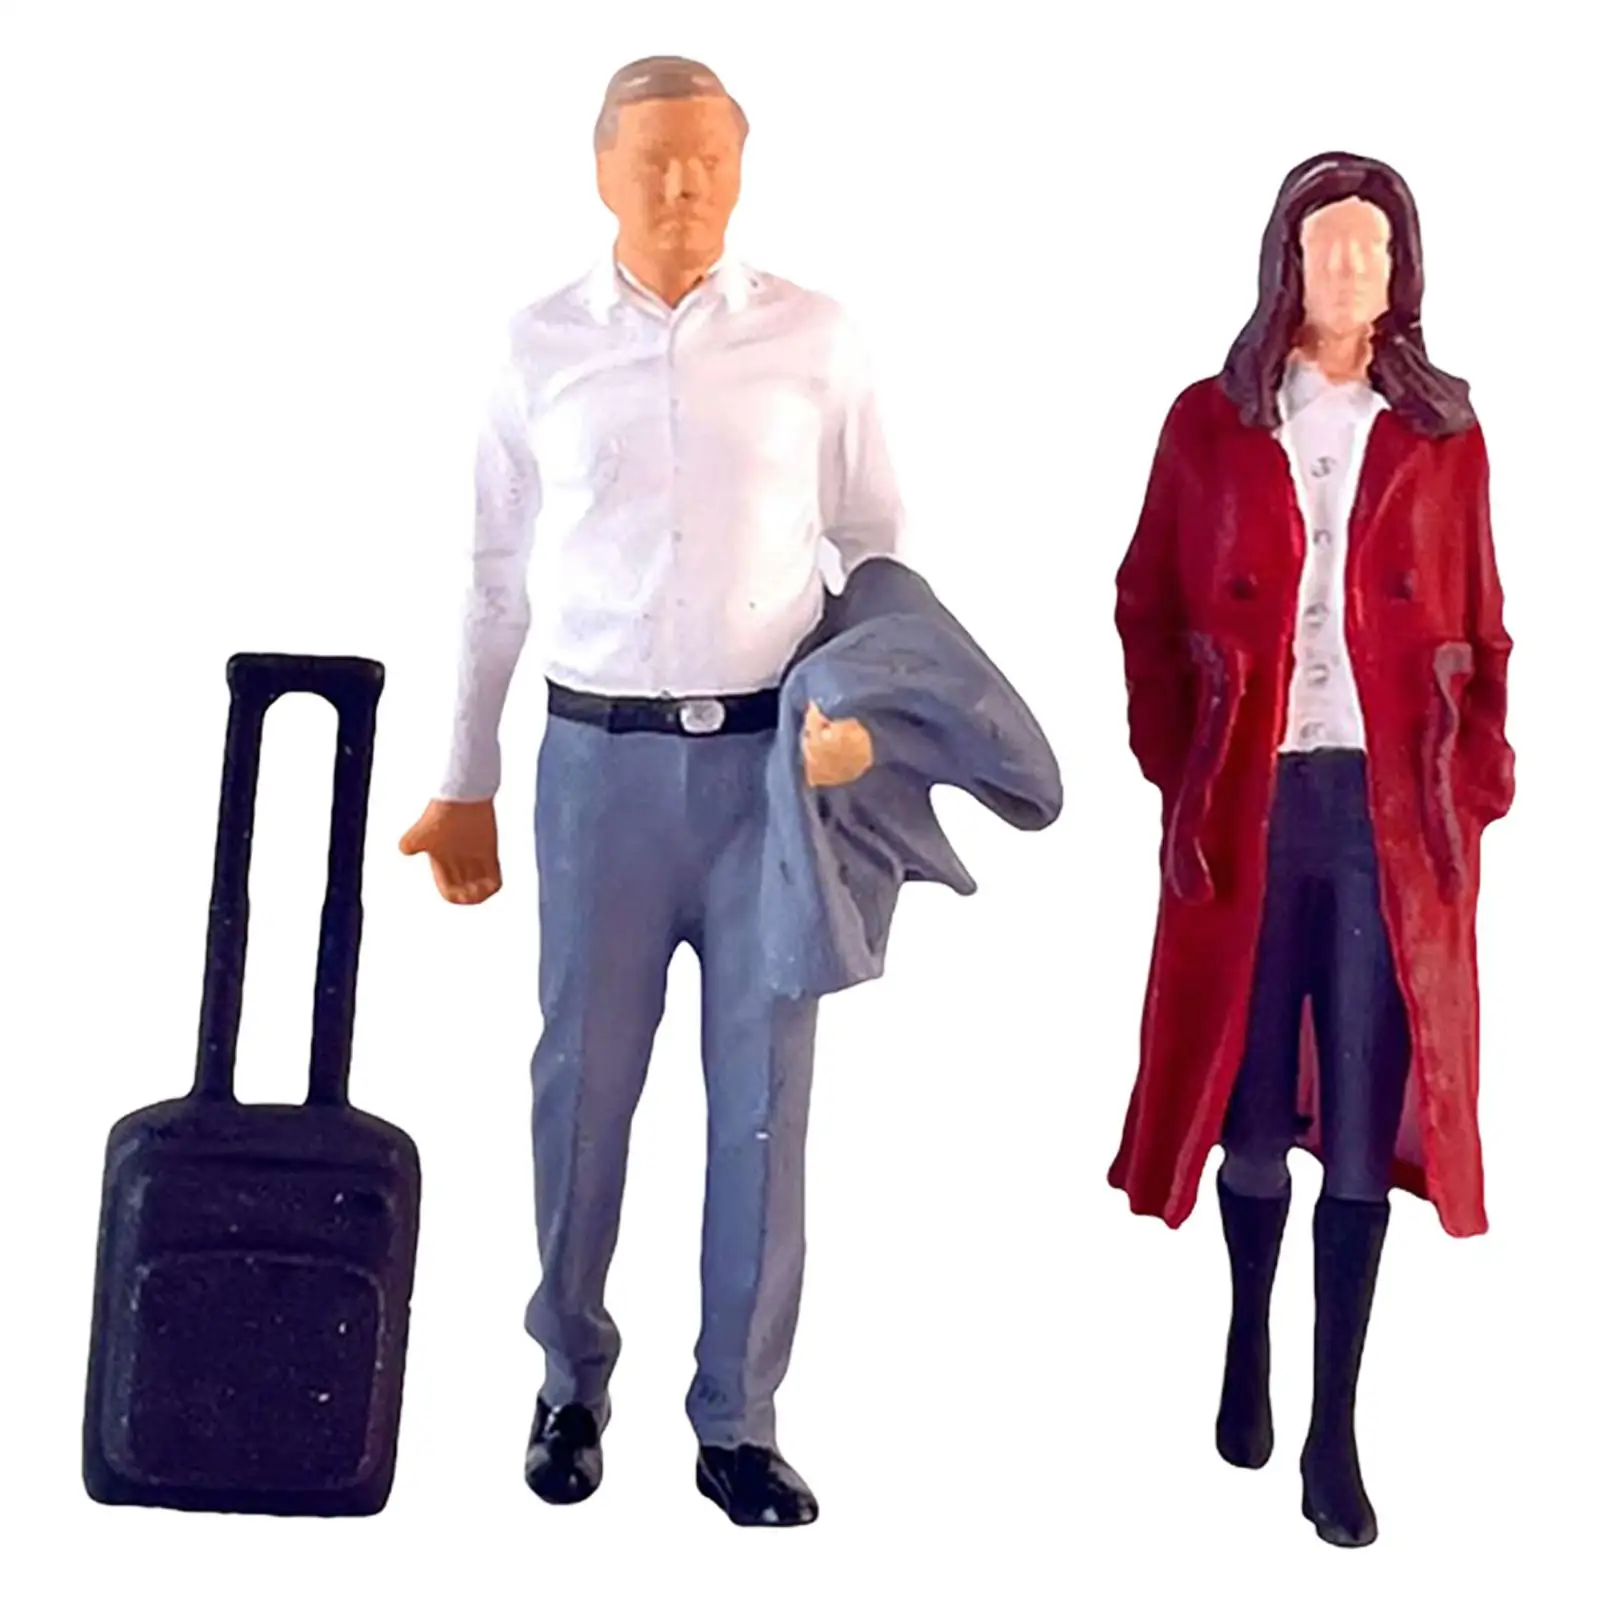 2 Pieces 1:64 Scale Women and Men Figures with Suitcase Model Movie Props Sand Table Layout Decoration Diorama Scenery Decor